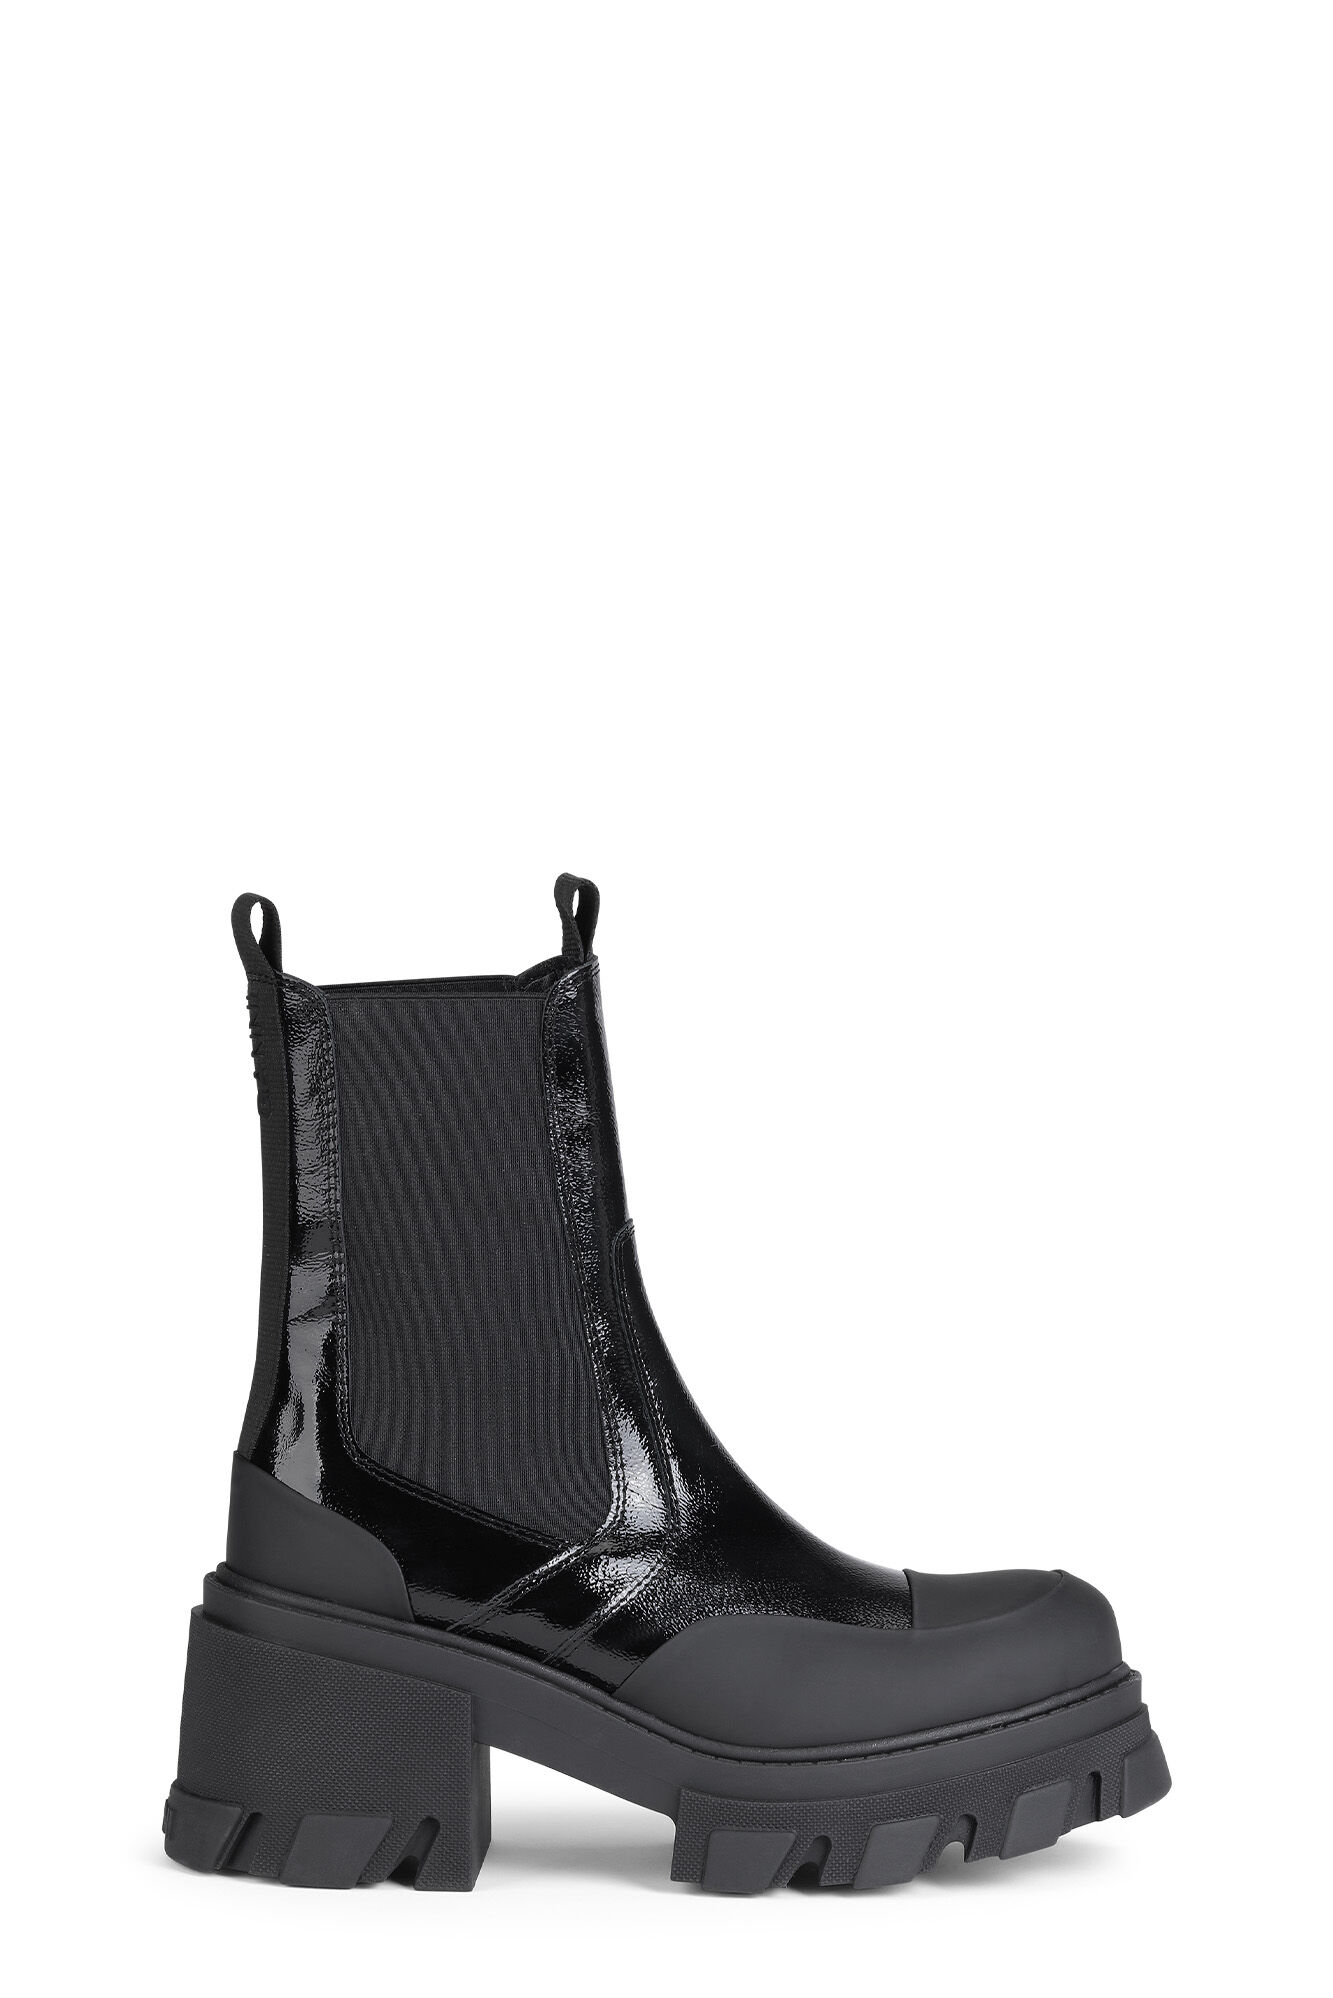 GANNI】CLEATED MID CHELSEA BOOTS-